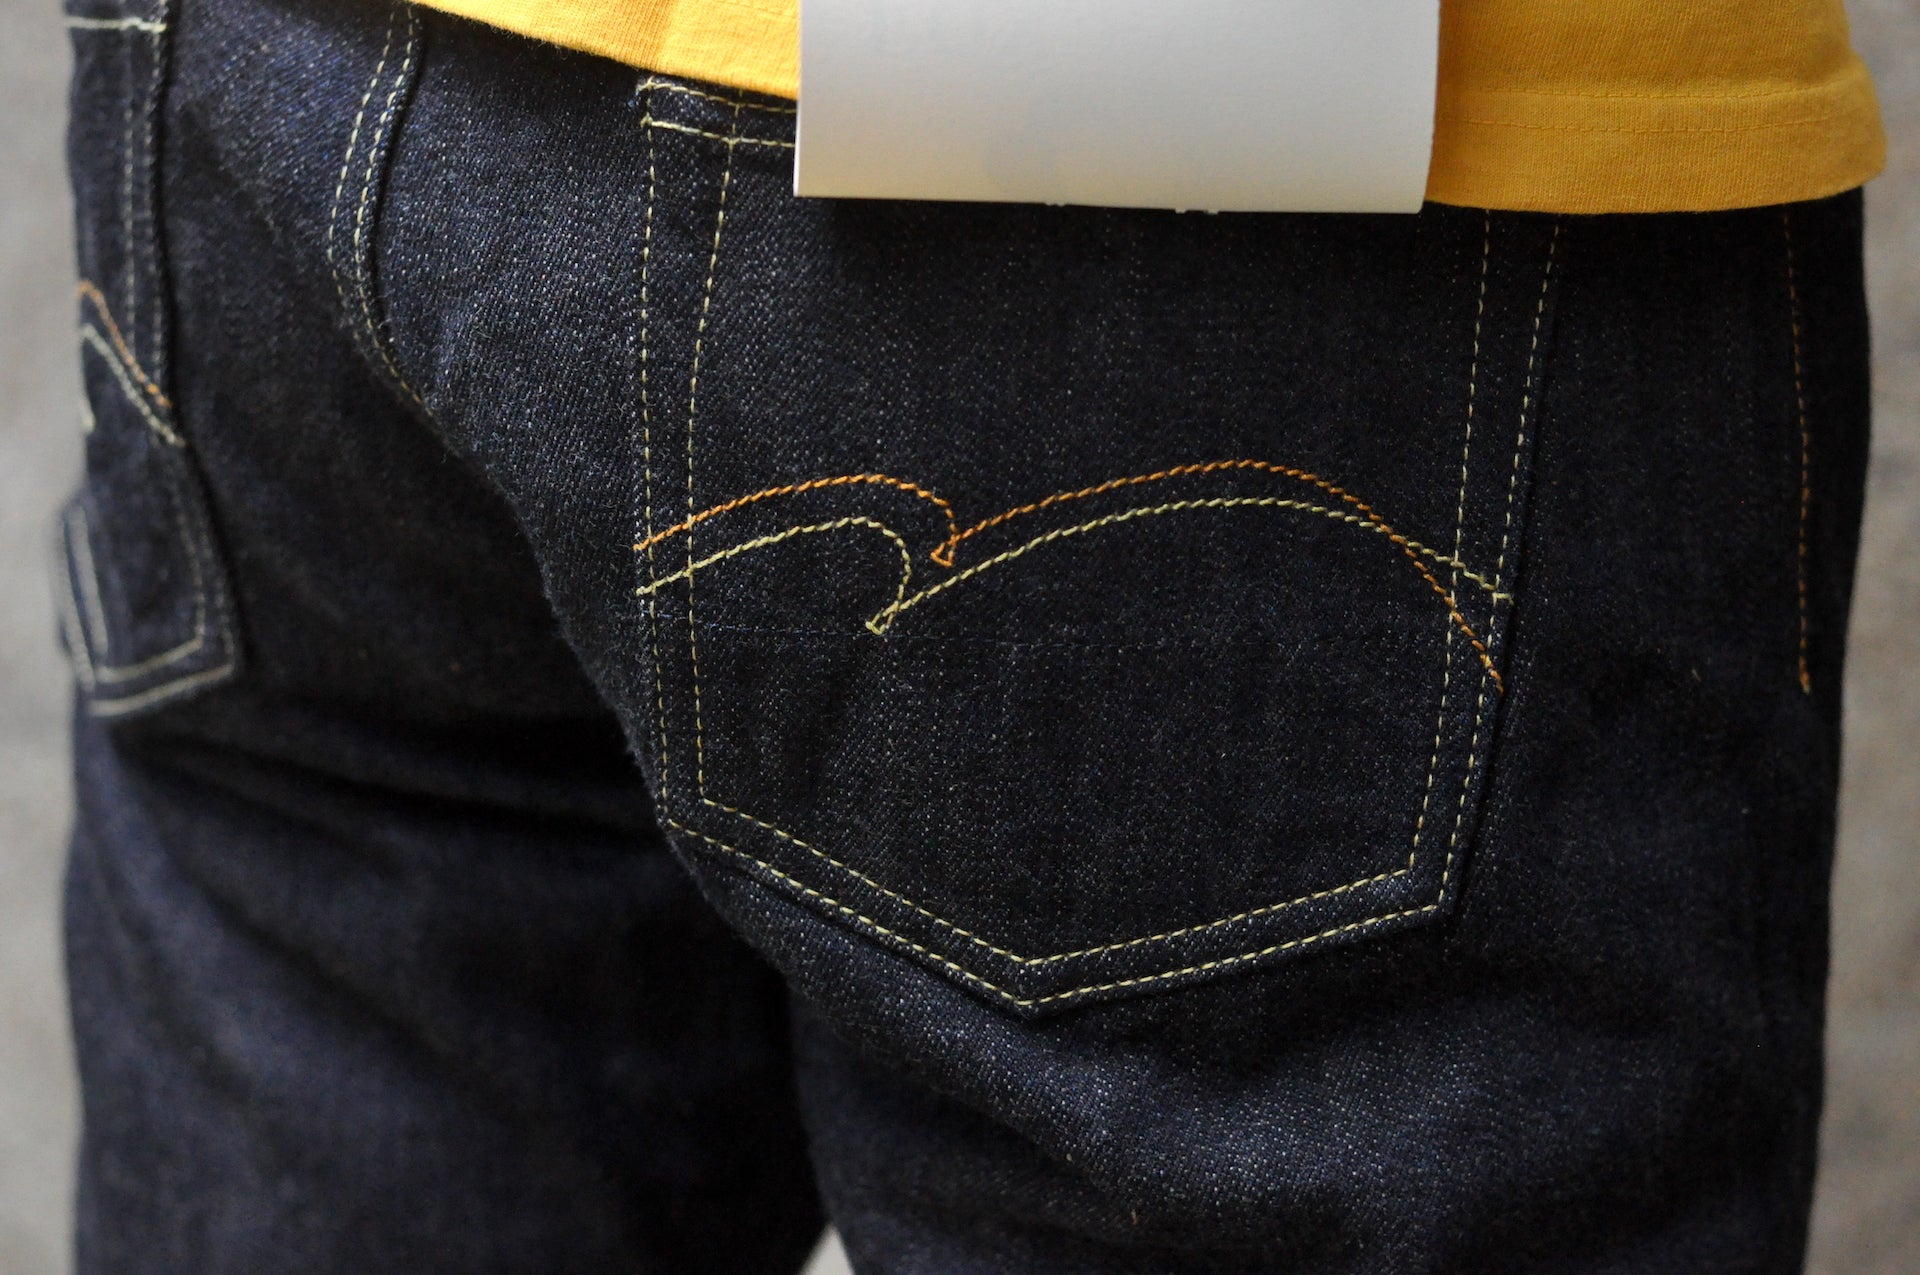 Studio D'Artisan FOX Fibre X G3 Organic Selvage Jeans Here it is the fit of  the new jeans specially made by Studio D'Artisan, using